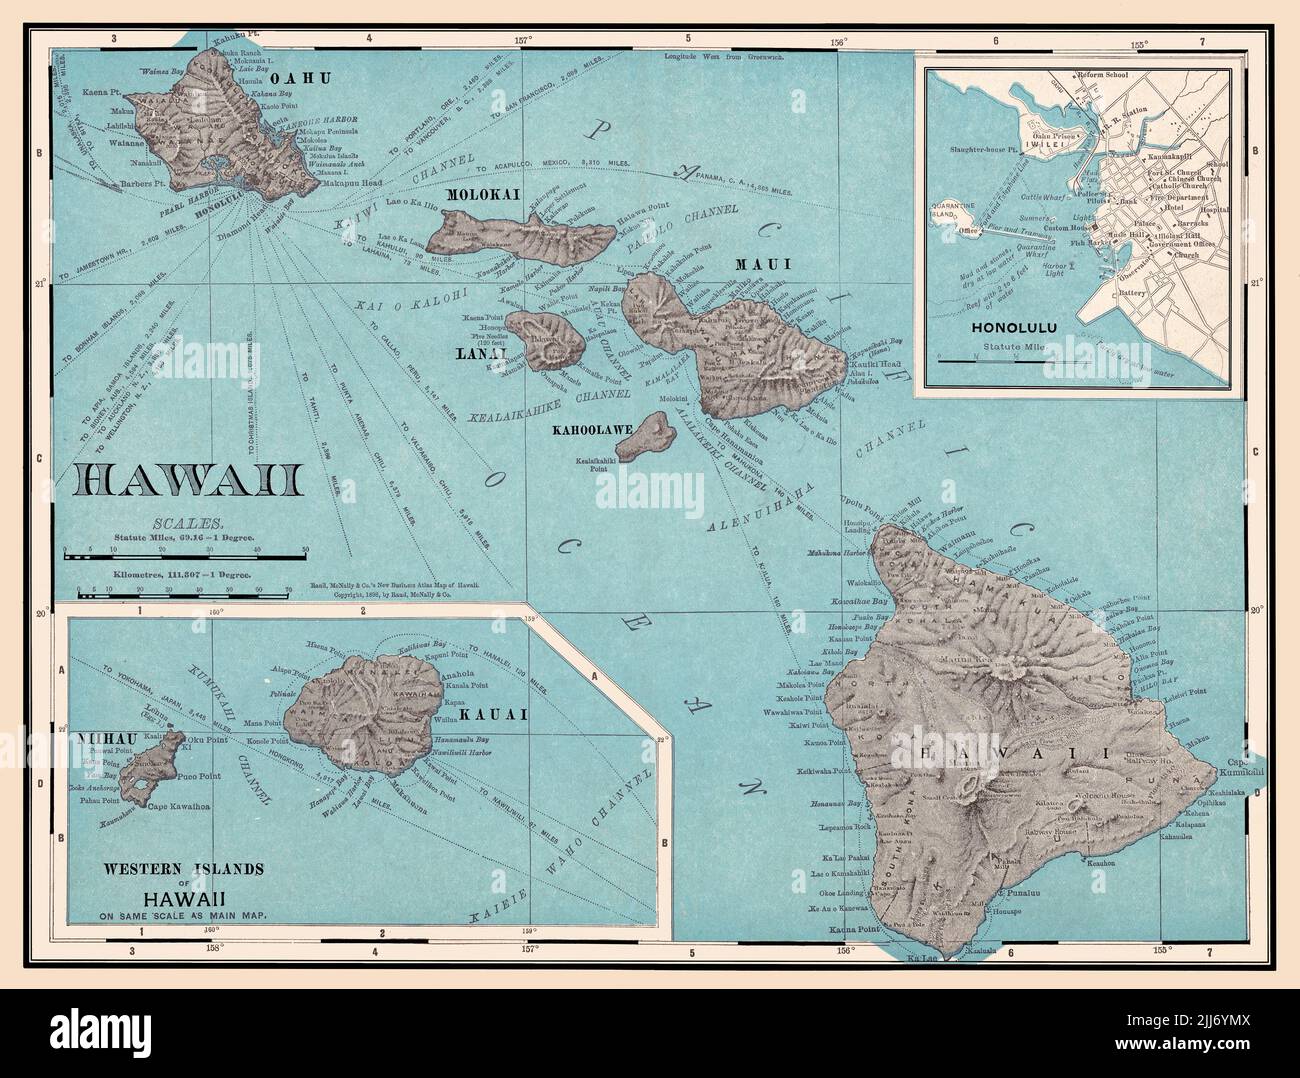 A restored, enhanced, reproduction of an 1898 antique map of the Hawaiian Islands with distances to various destinations shown. The upper right hand corner features an insert map of the city of Honolulu. Stock Photo